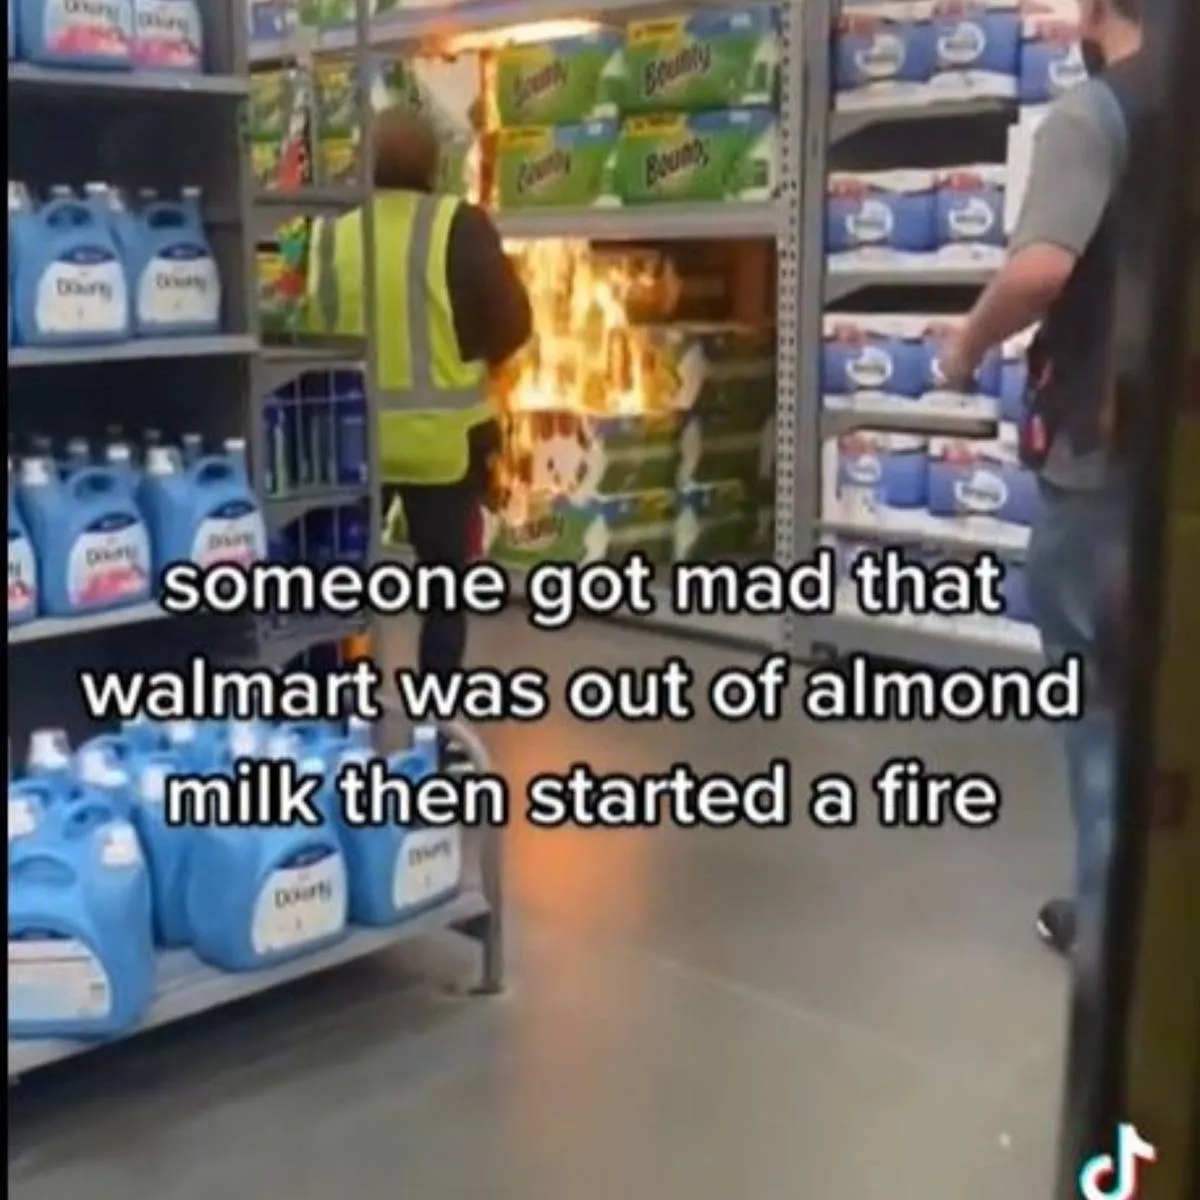 someone starting a fire over almond milk